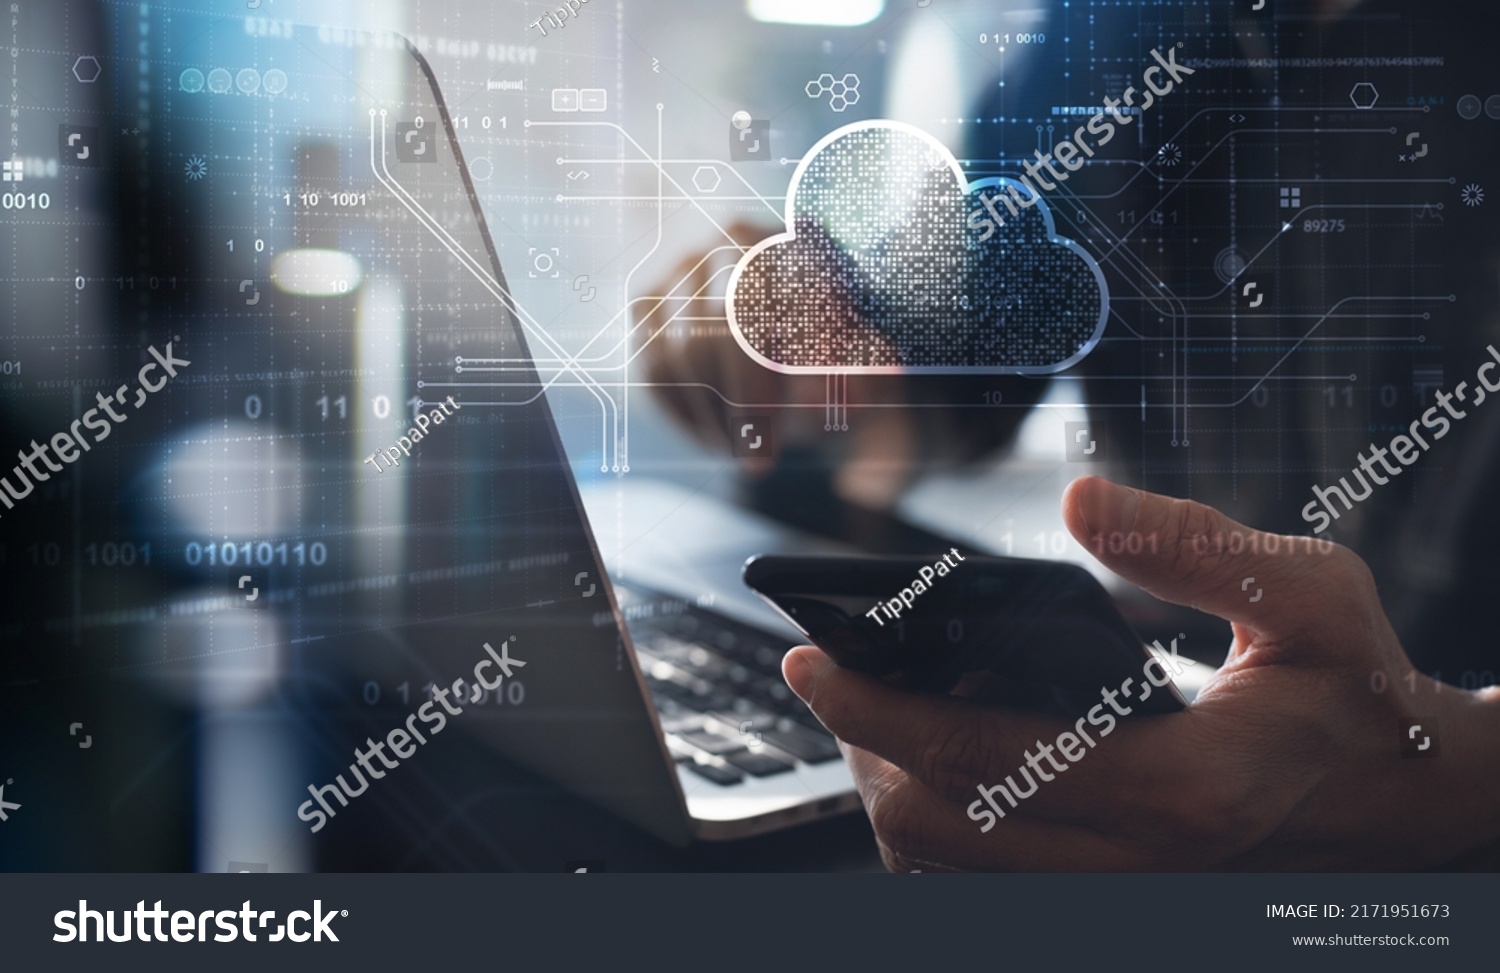 Cloud technology. Data storage and backup, Edge computing technology. Networking and internet service concept. Man using laptop computer and mobile phone with cloud computing diagram. #2171951673